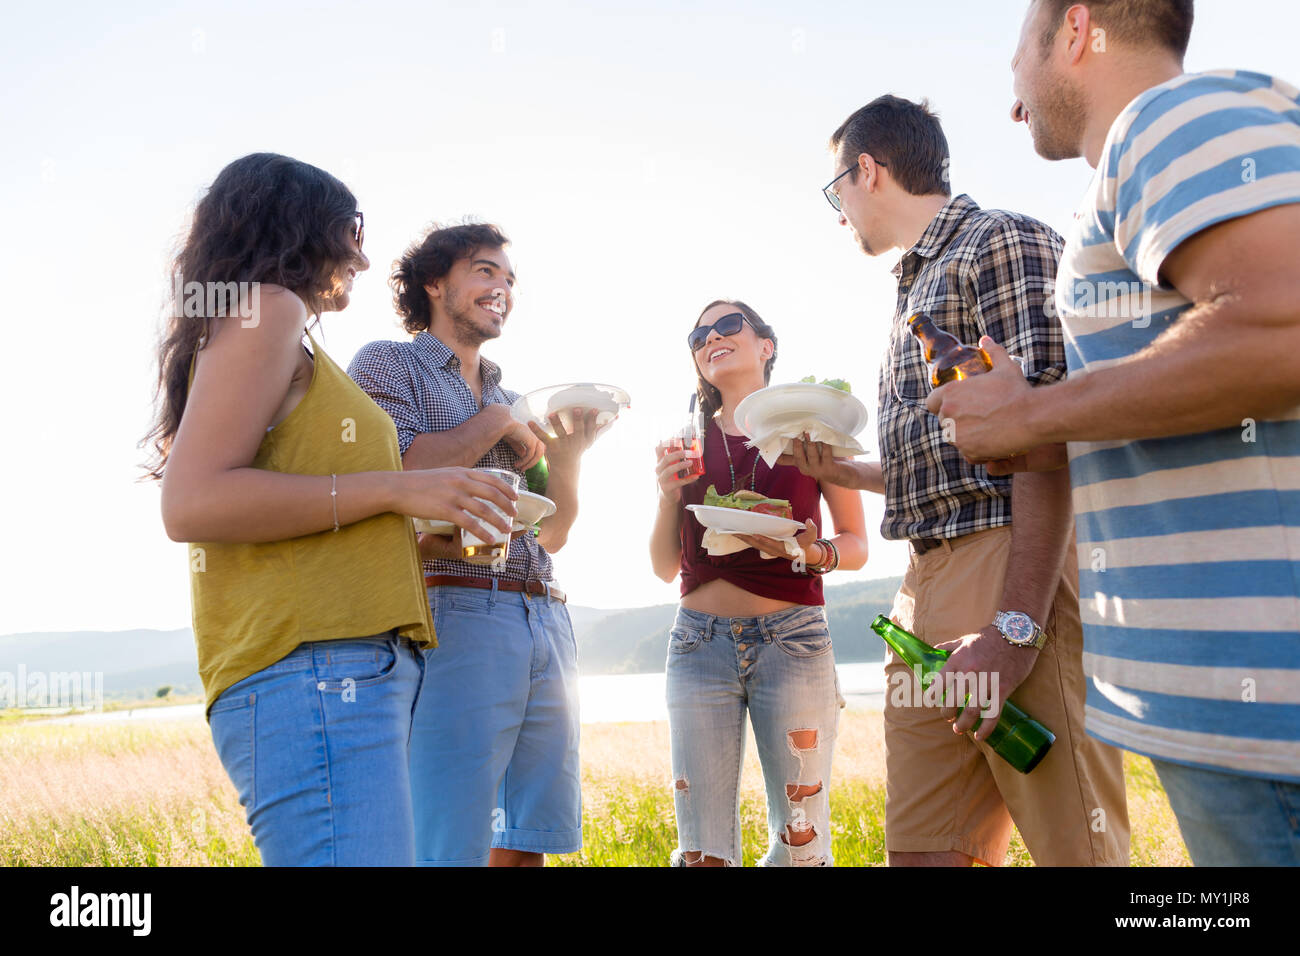 Young men and women on BBQ party in country Stock Photo